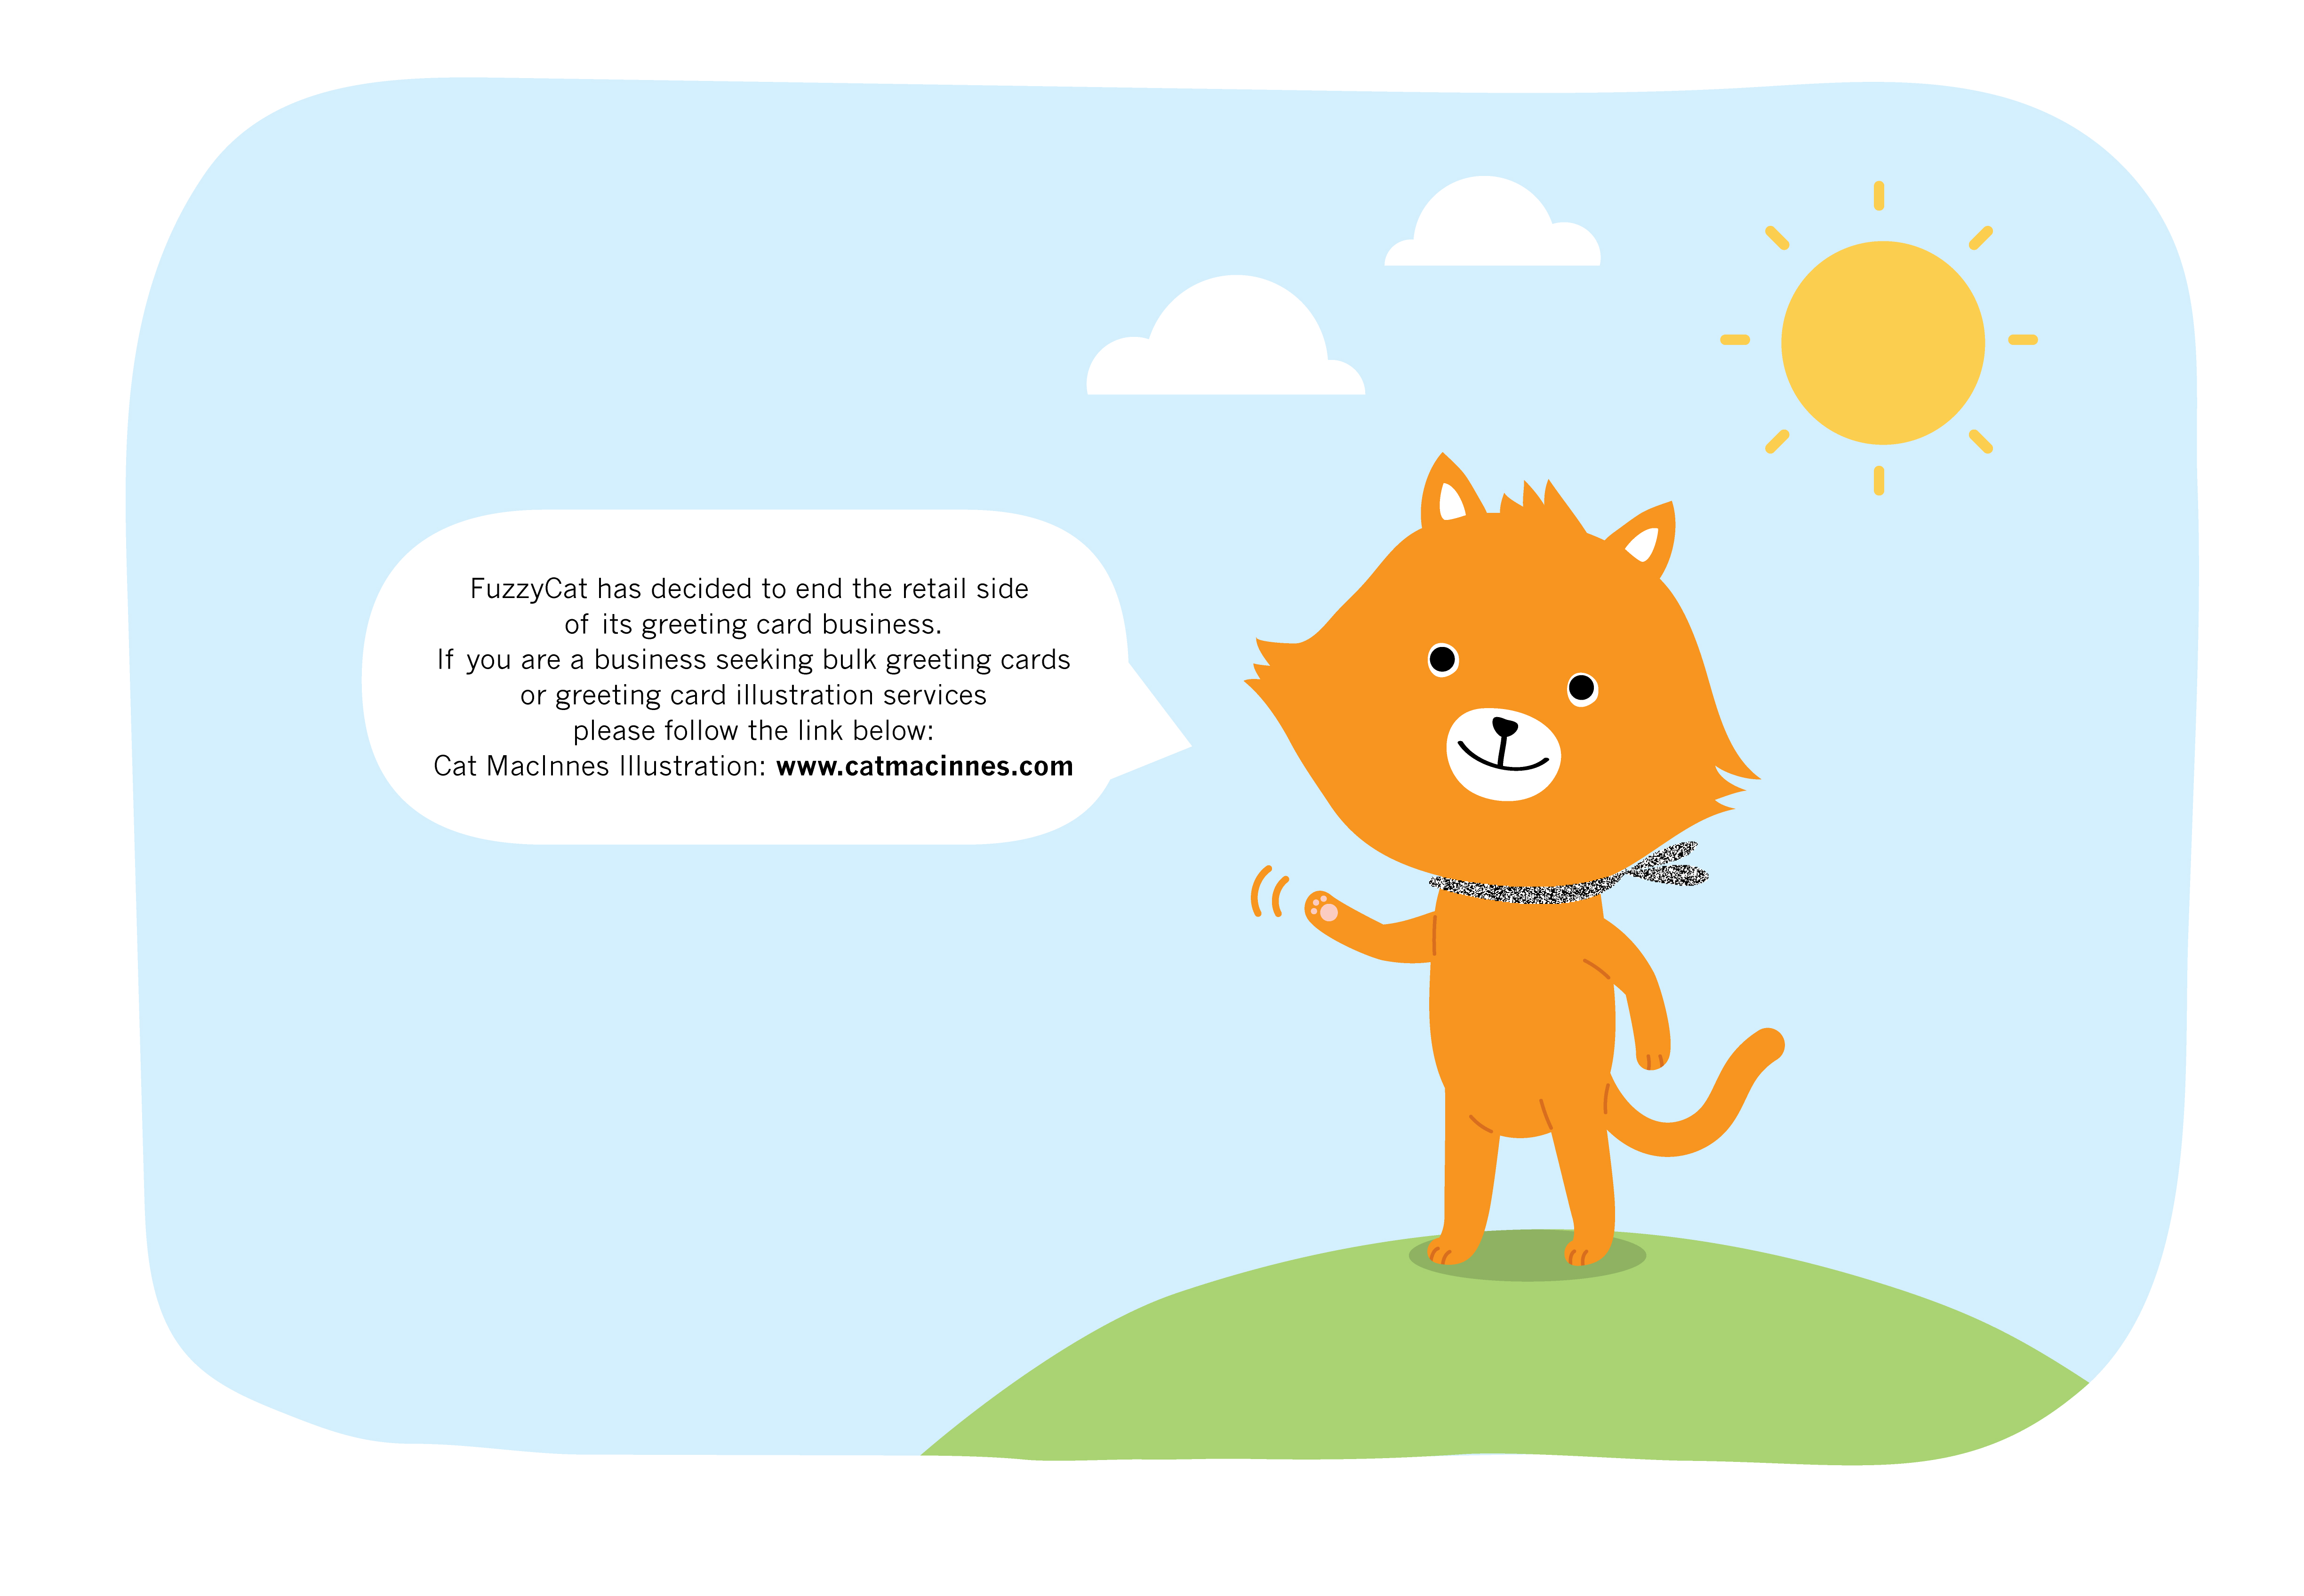 FuzzCat has decided to end the retail side of its greeting card business.
If you are a business seeking bulk greeting cards or greeting card illustration services please follow the link below:
Cat MacInnes Illustration: www.catmacinnes.com